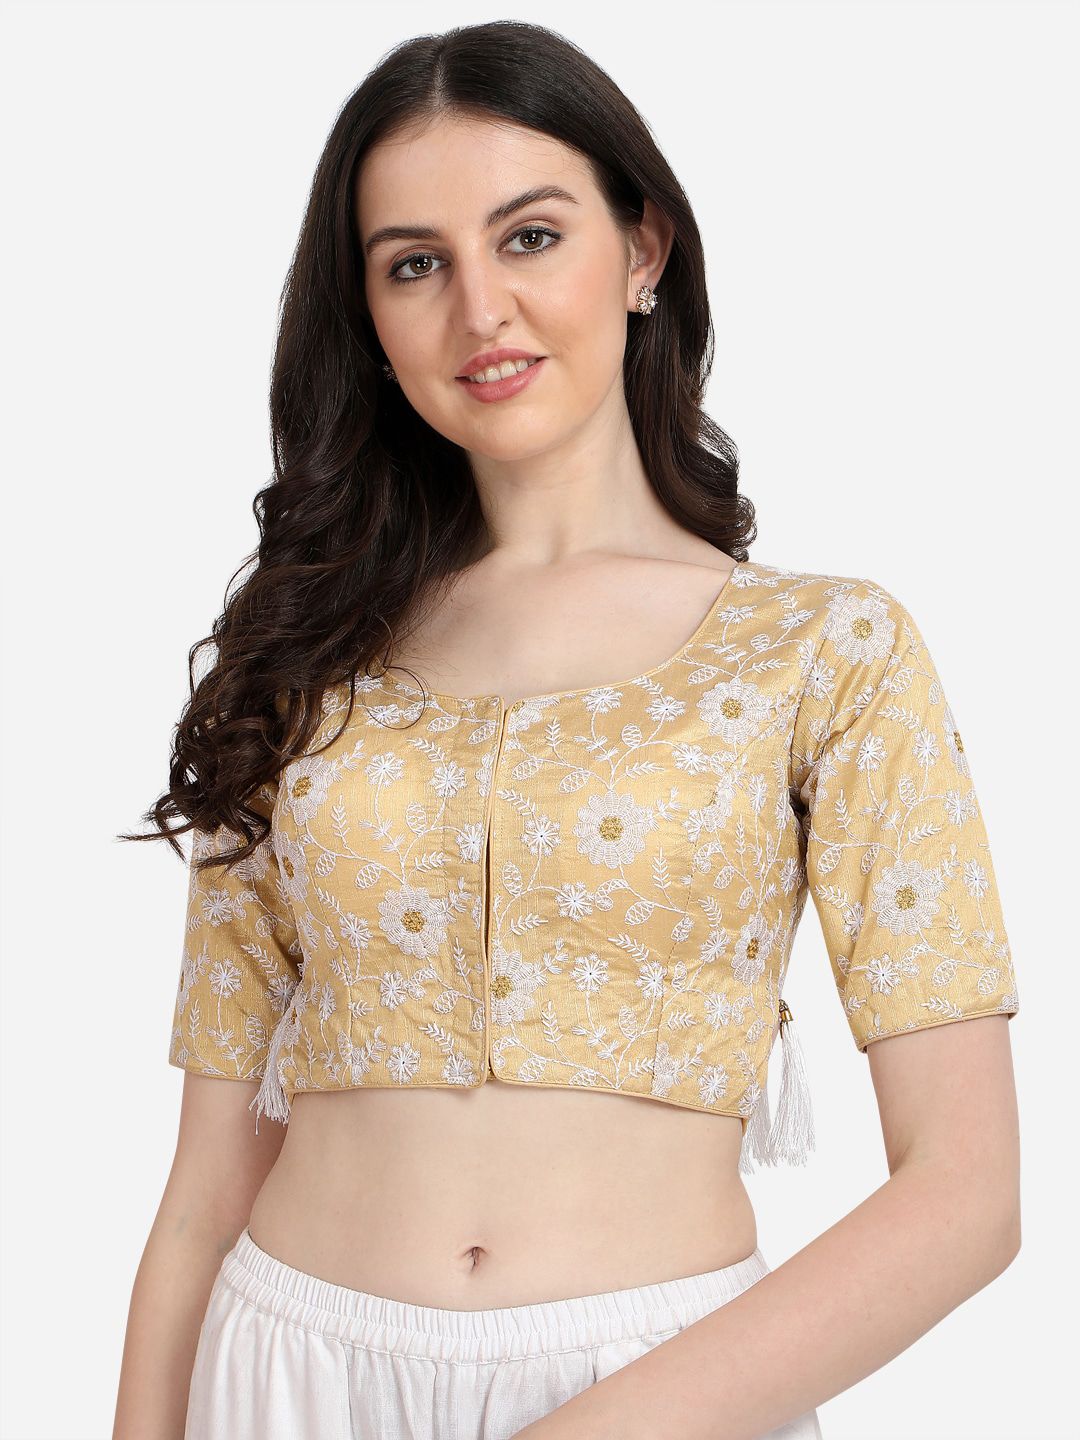 Fab Dadu Beige & Silver-Coloured Embroidered Saree Blouse Price in India